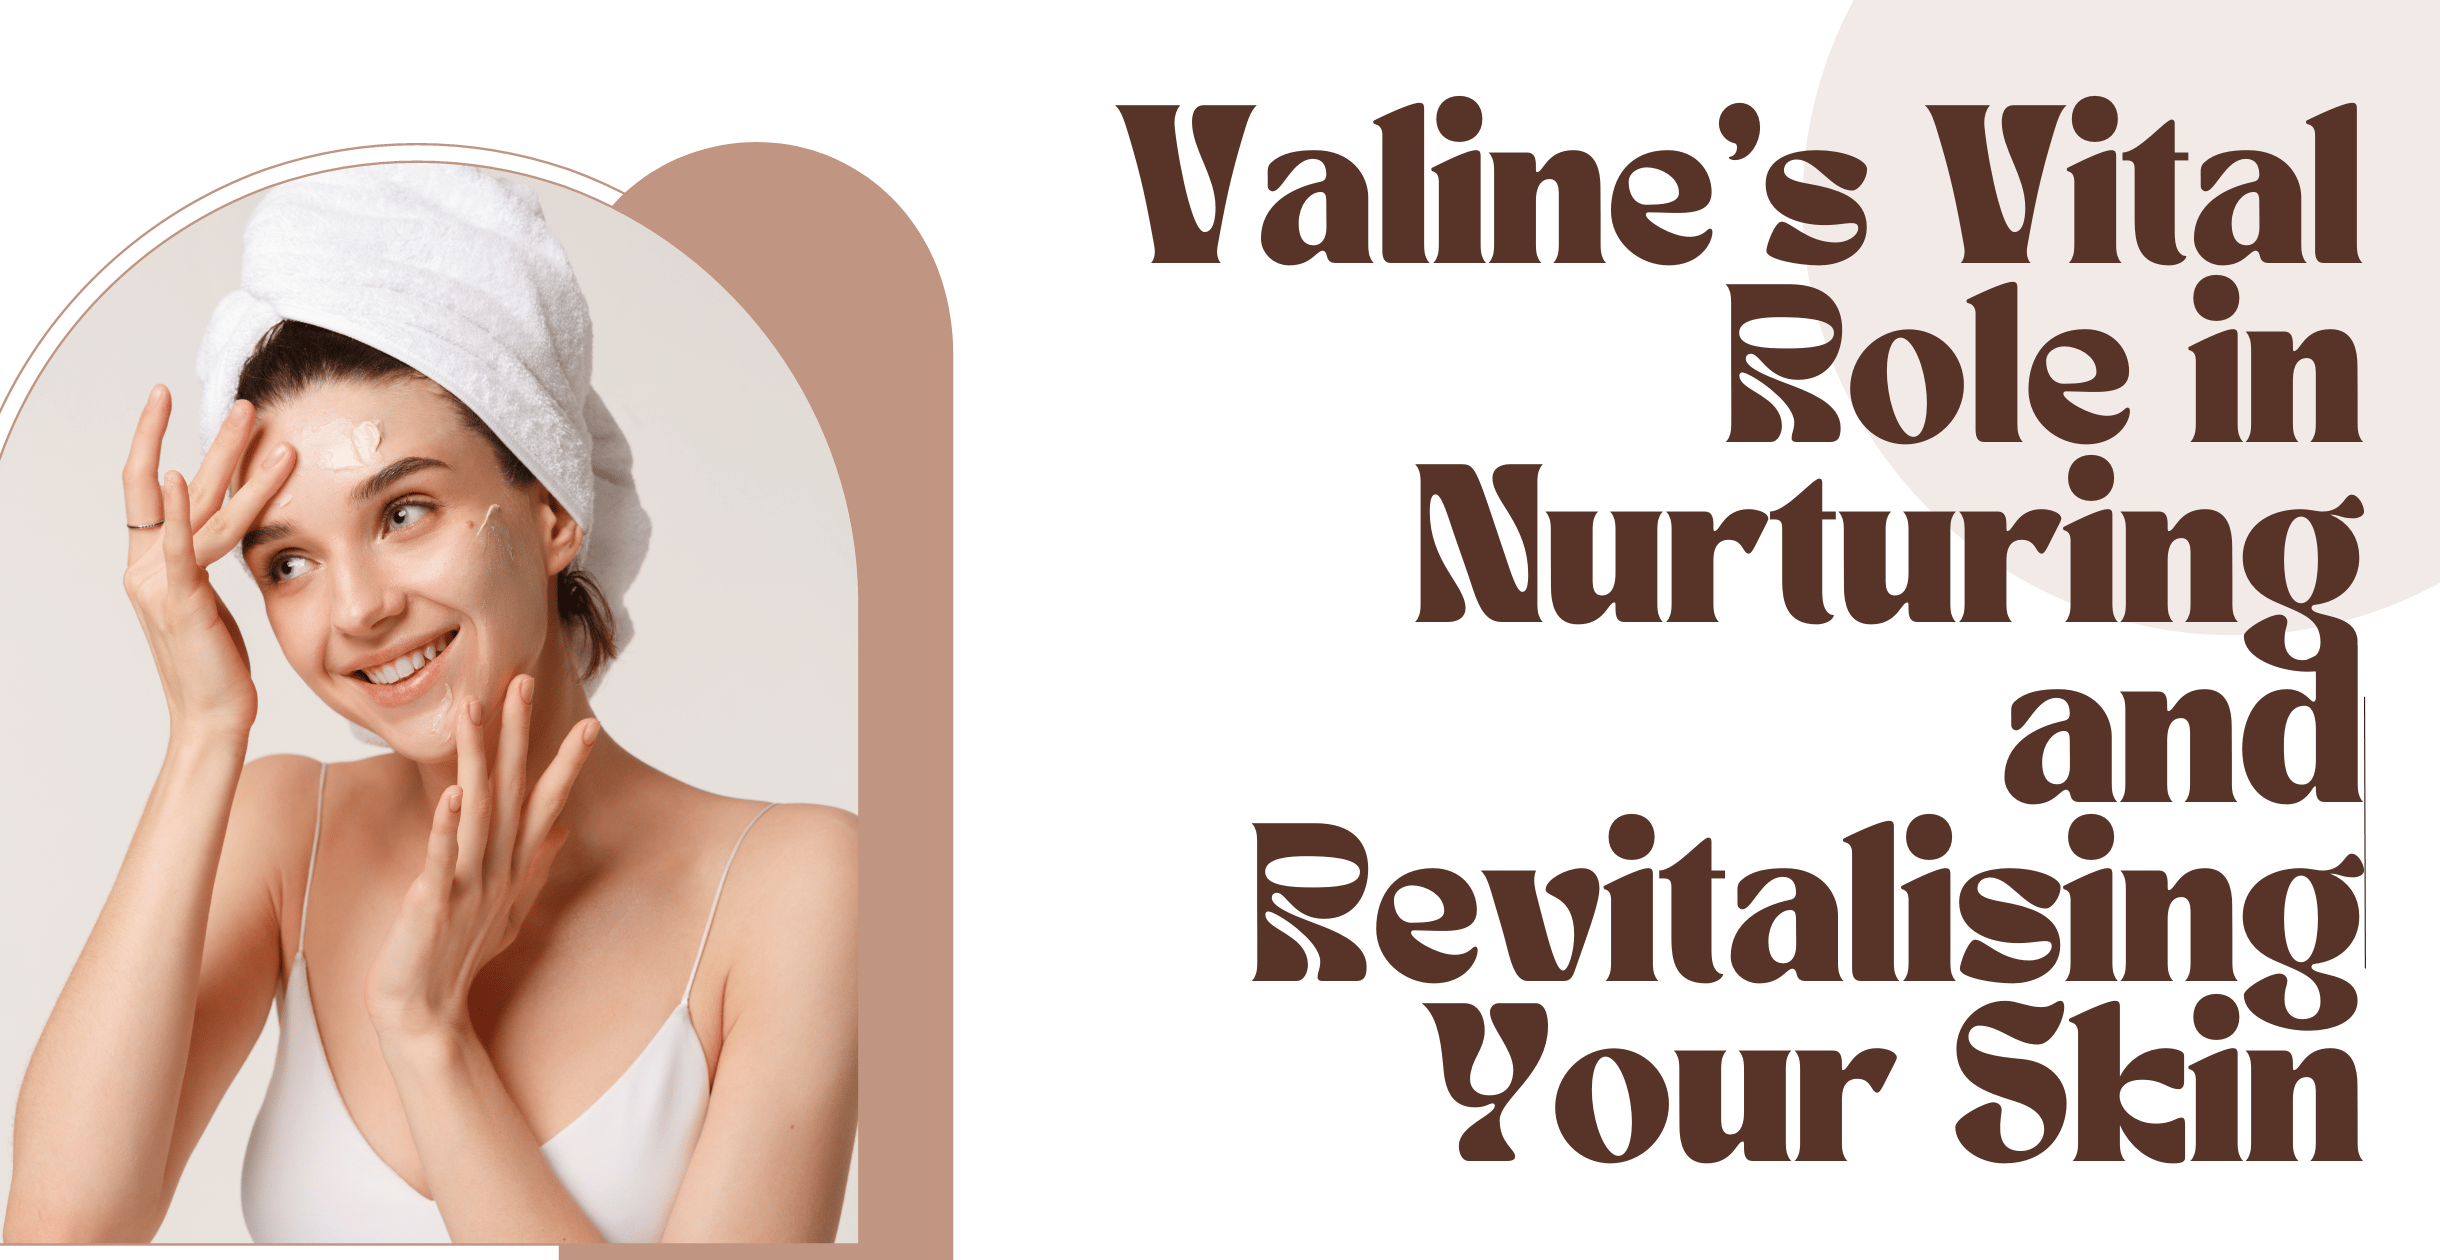 Valine’s Vital Role in Nurturing and Revitalising Your Skin